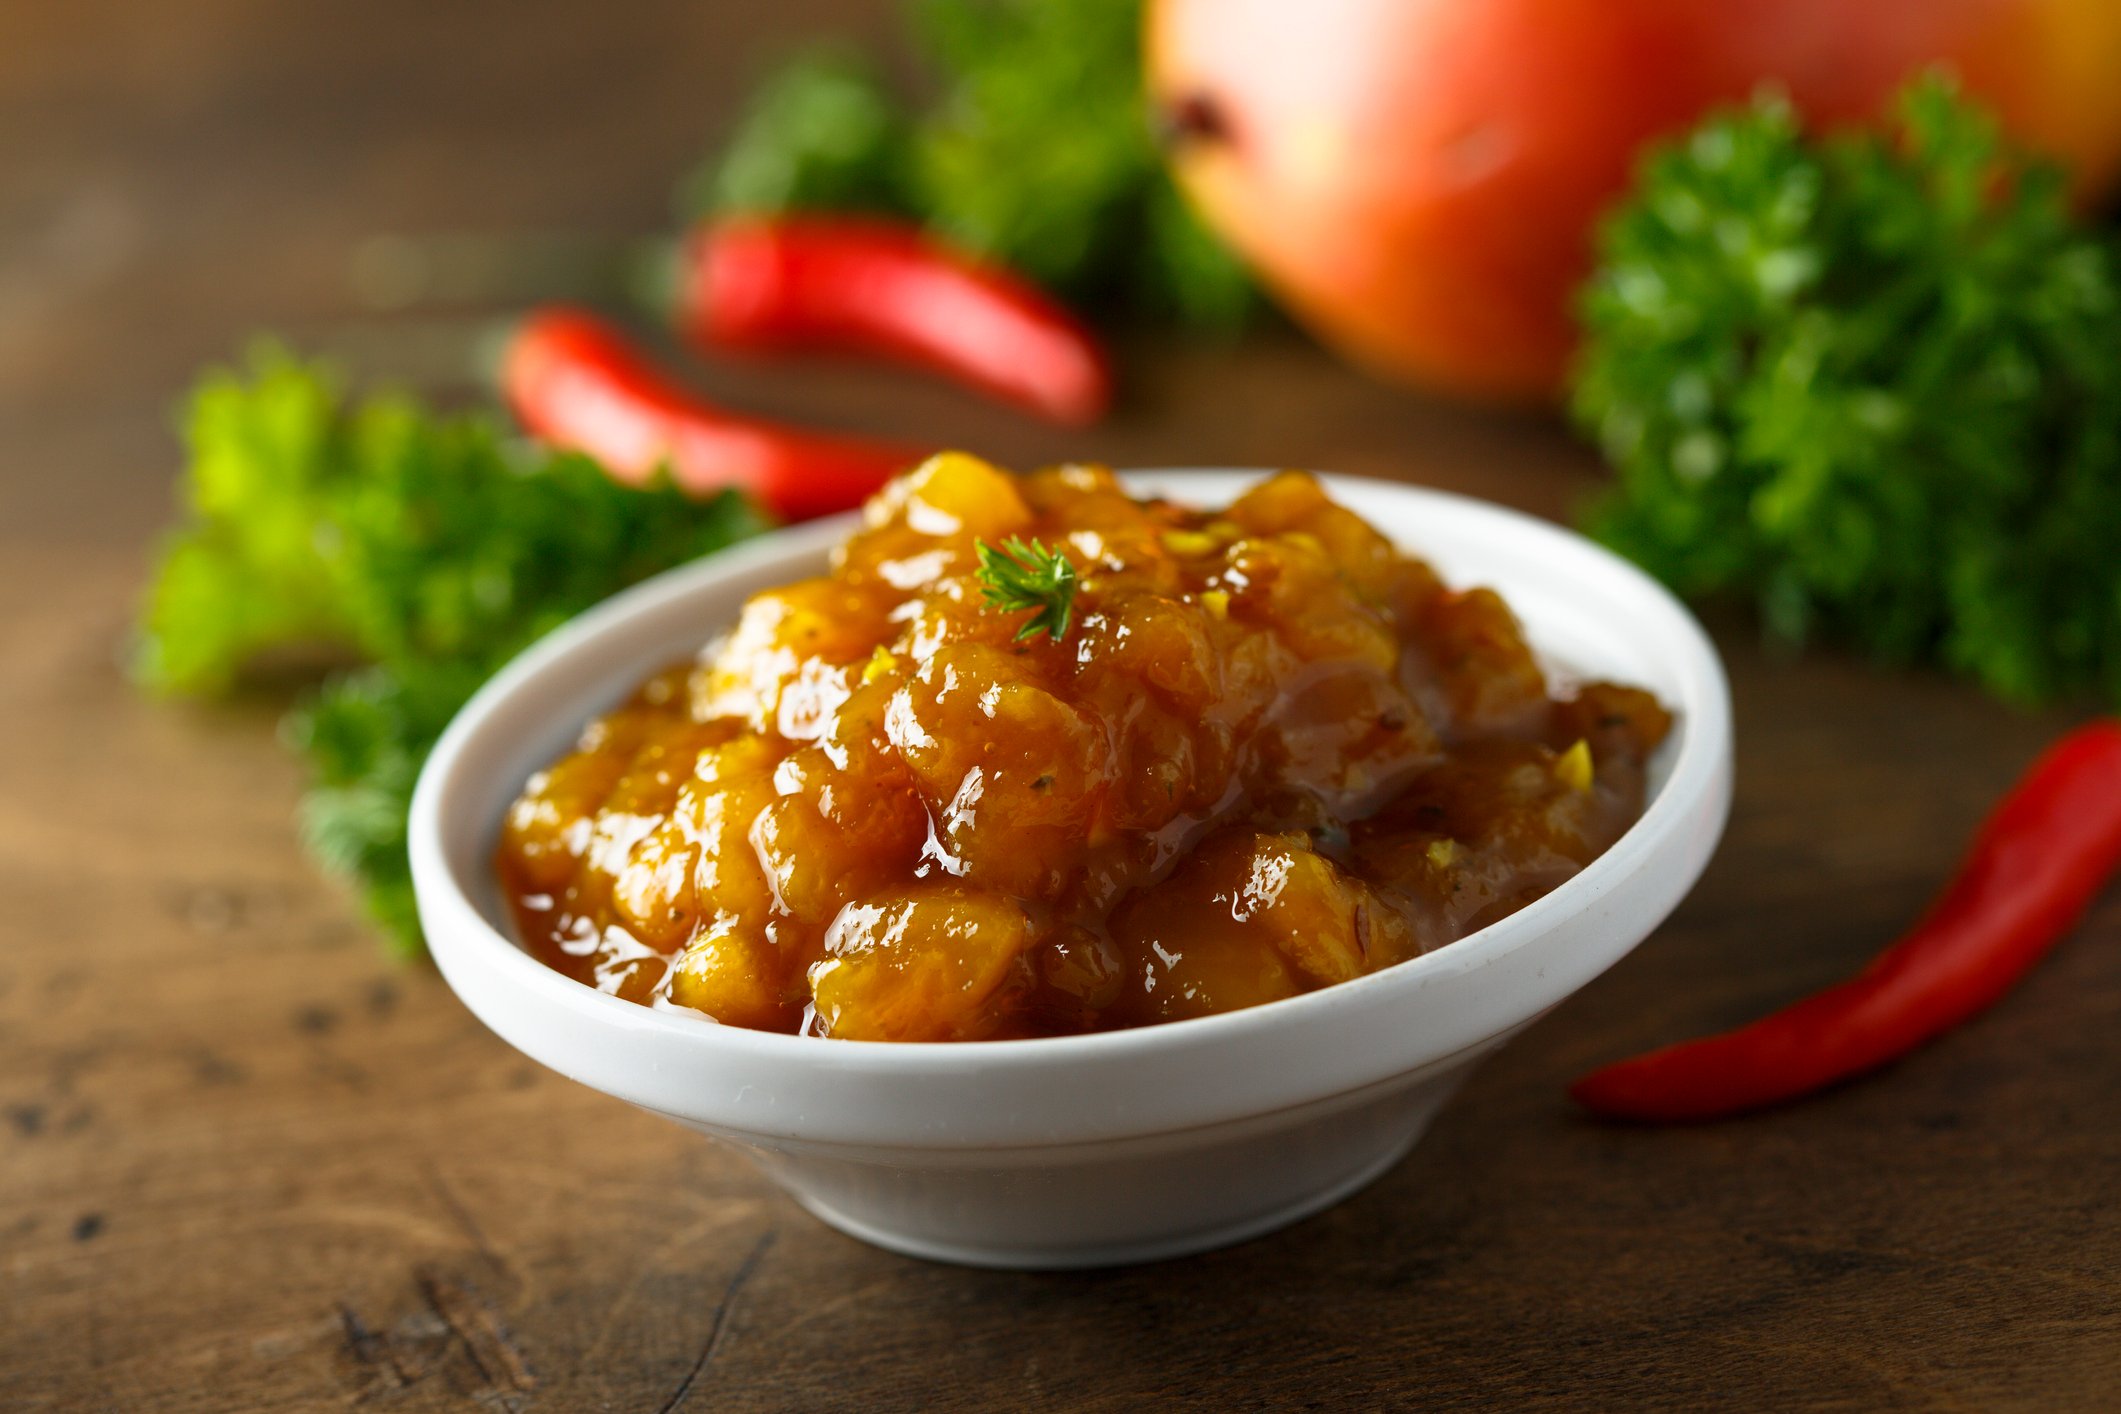 Homemade spicy mango chutney is a great addition to sauteed meat and vegetables. (iStock Photo)